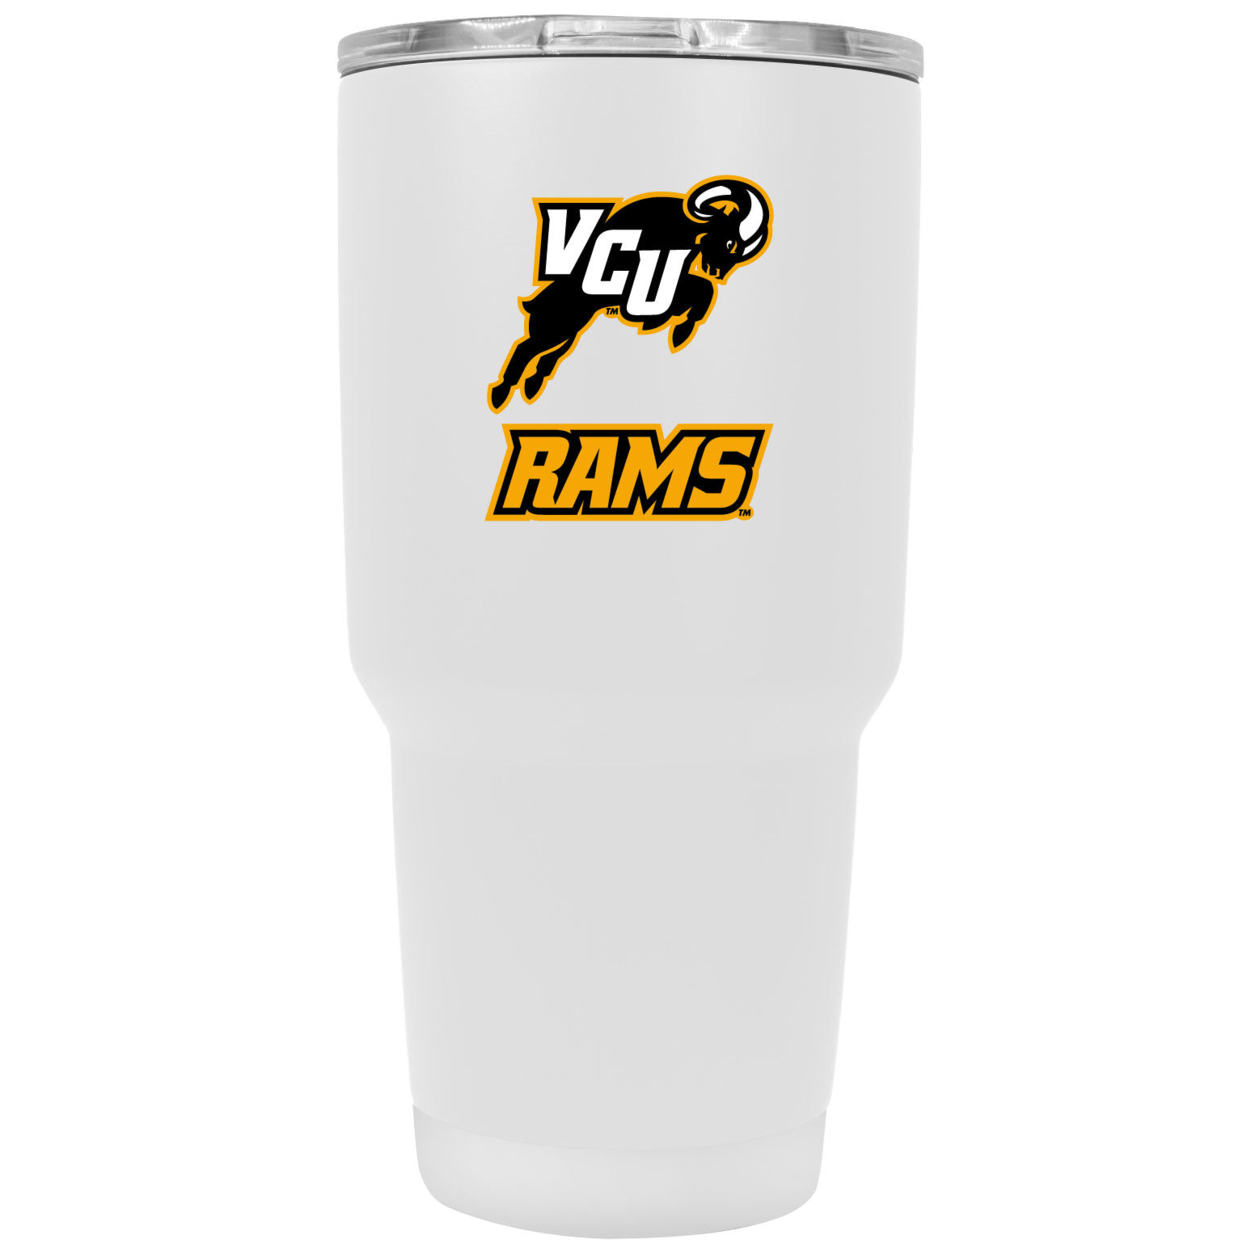 Virginia Commonwealth 24 Oz Insulated Stainless Steel Tumblers - White